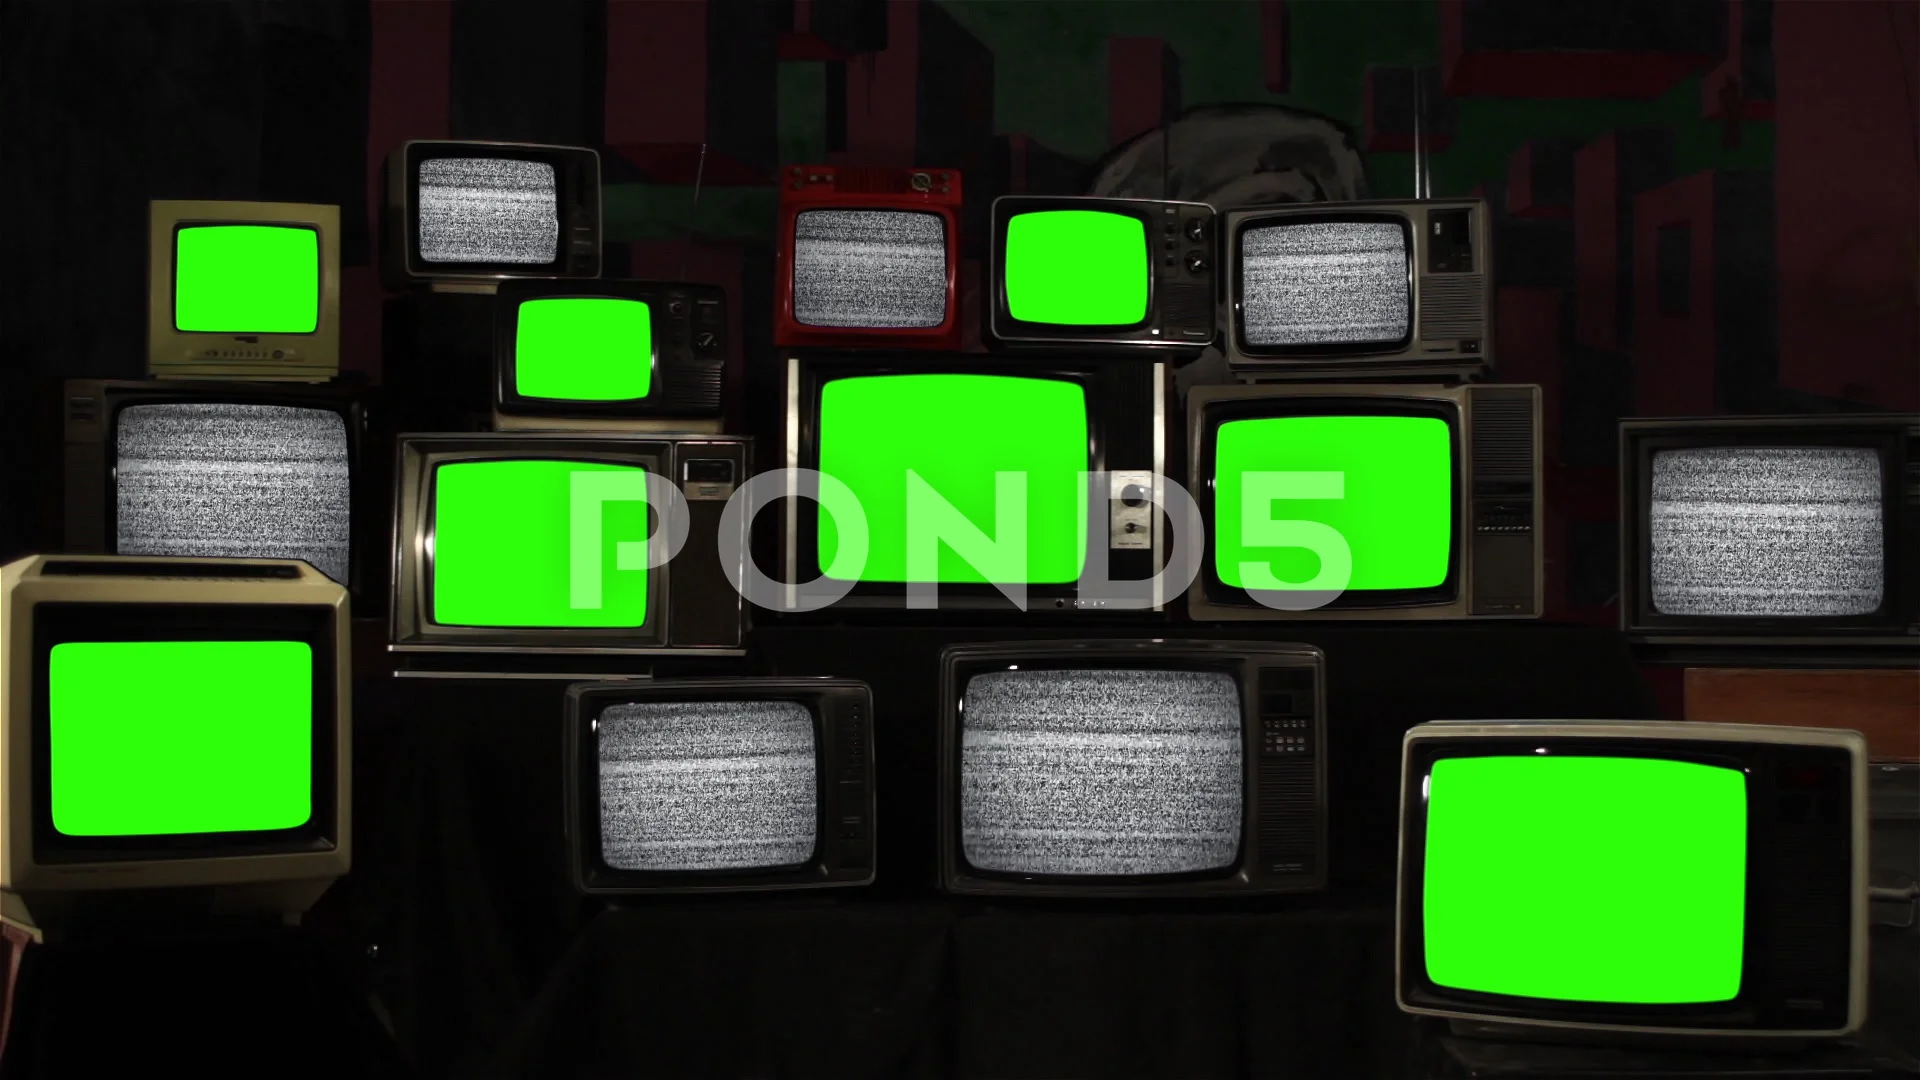 Can you turn the tv. Old TV Green Screen. Retro TV Greenscreen. Turn on Television Screen. Screen Wall.